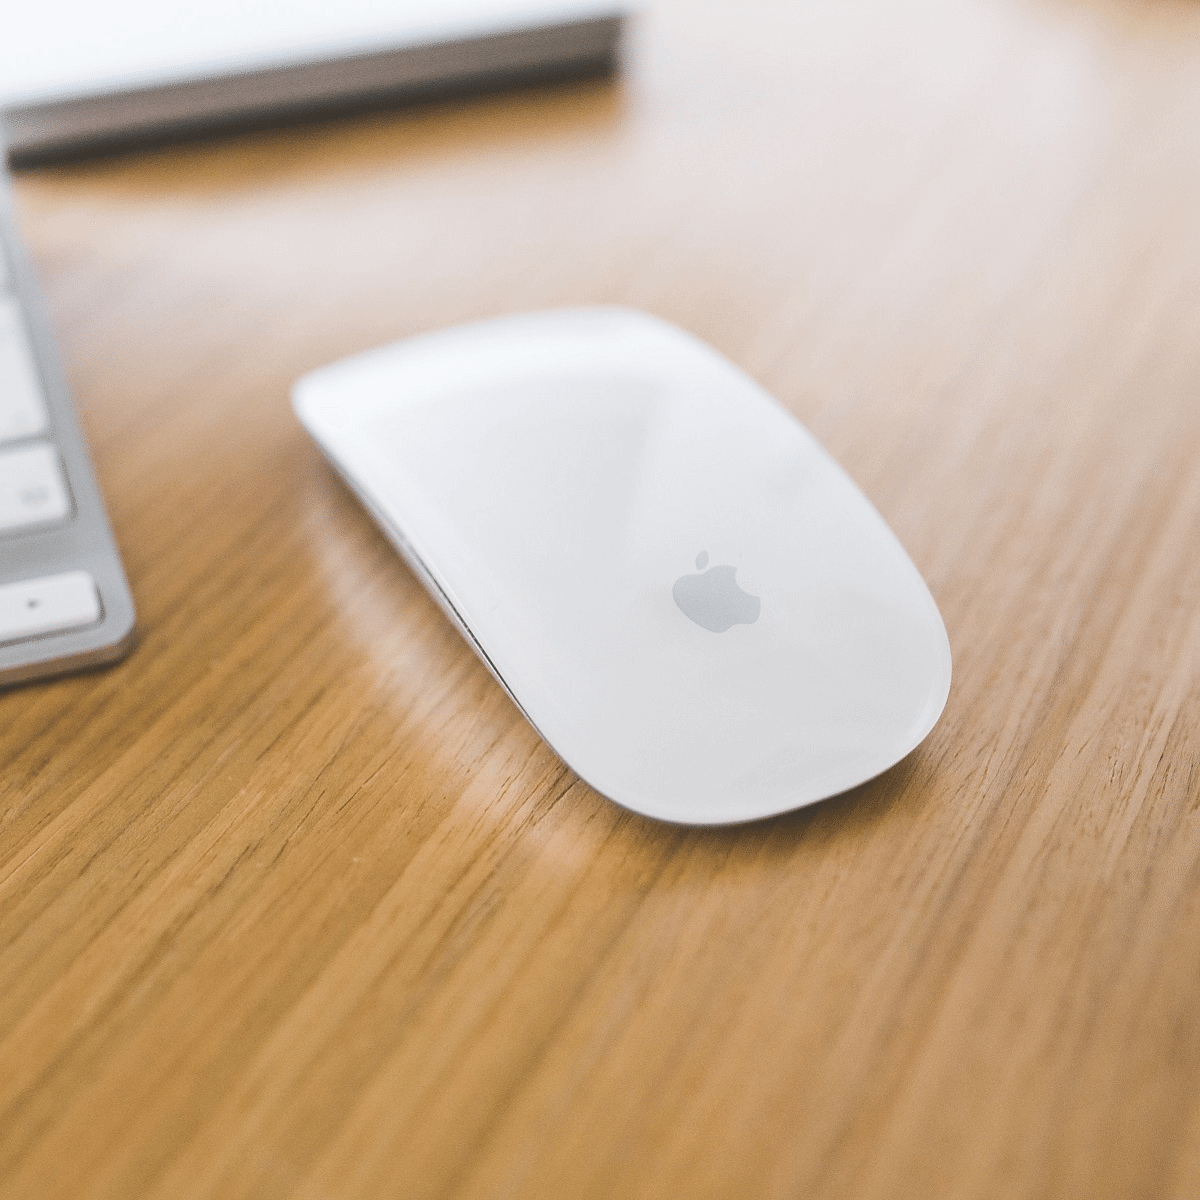 Magic Mouse won't connect to Win 10